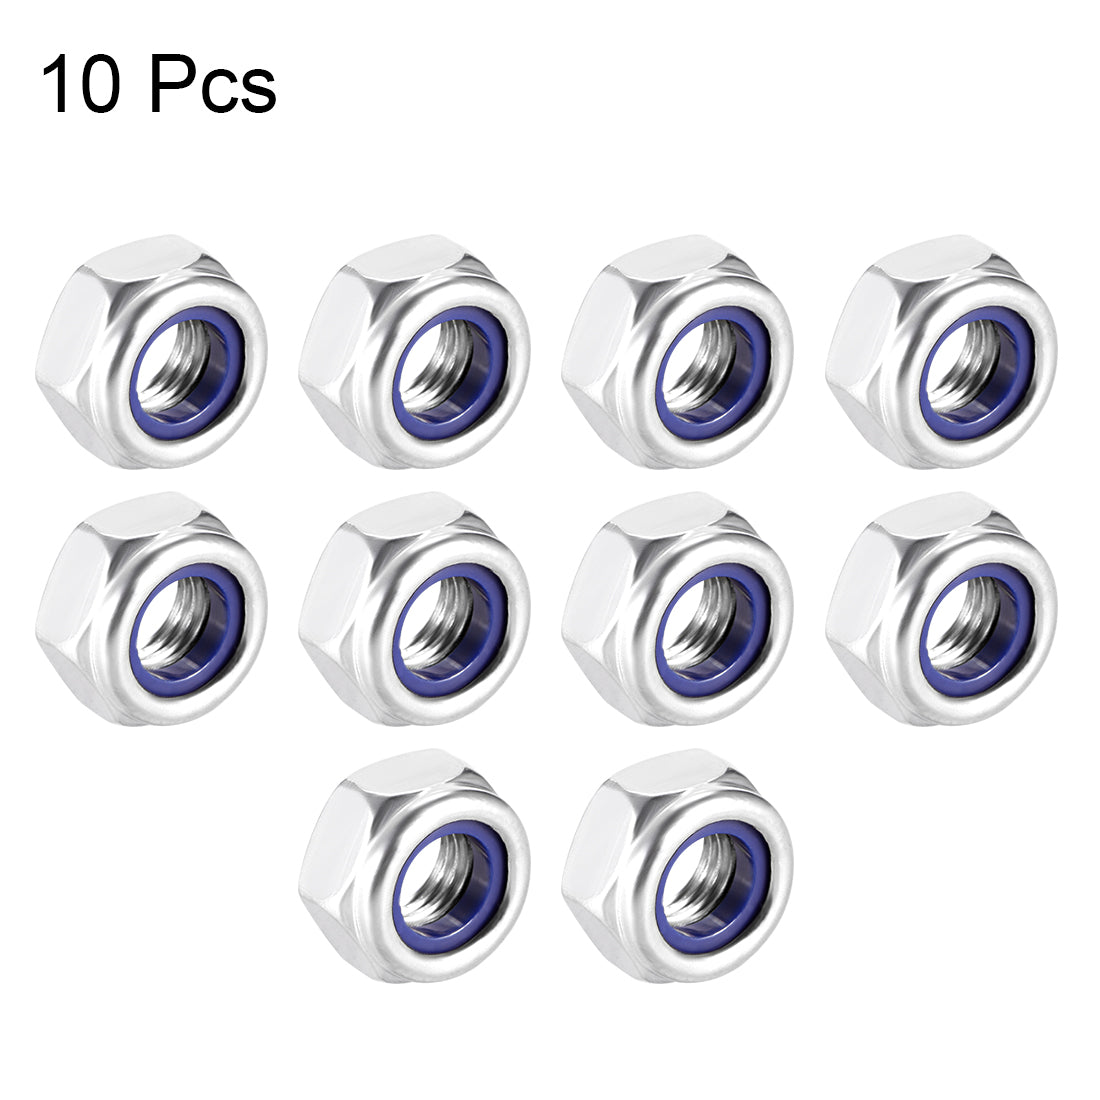 uxcell Uxcell M10x1.5mm Hex Lock Nut Stainless Steel Nylon Insert Self-Lock Nuts 10Pcs Silver